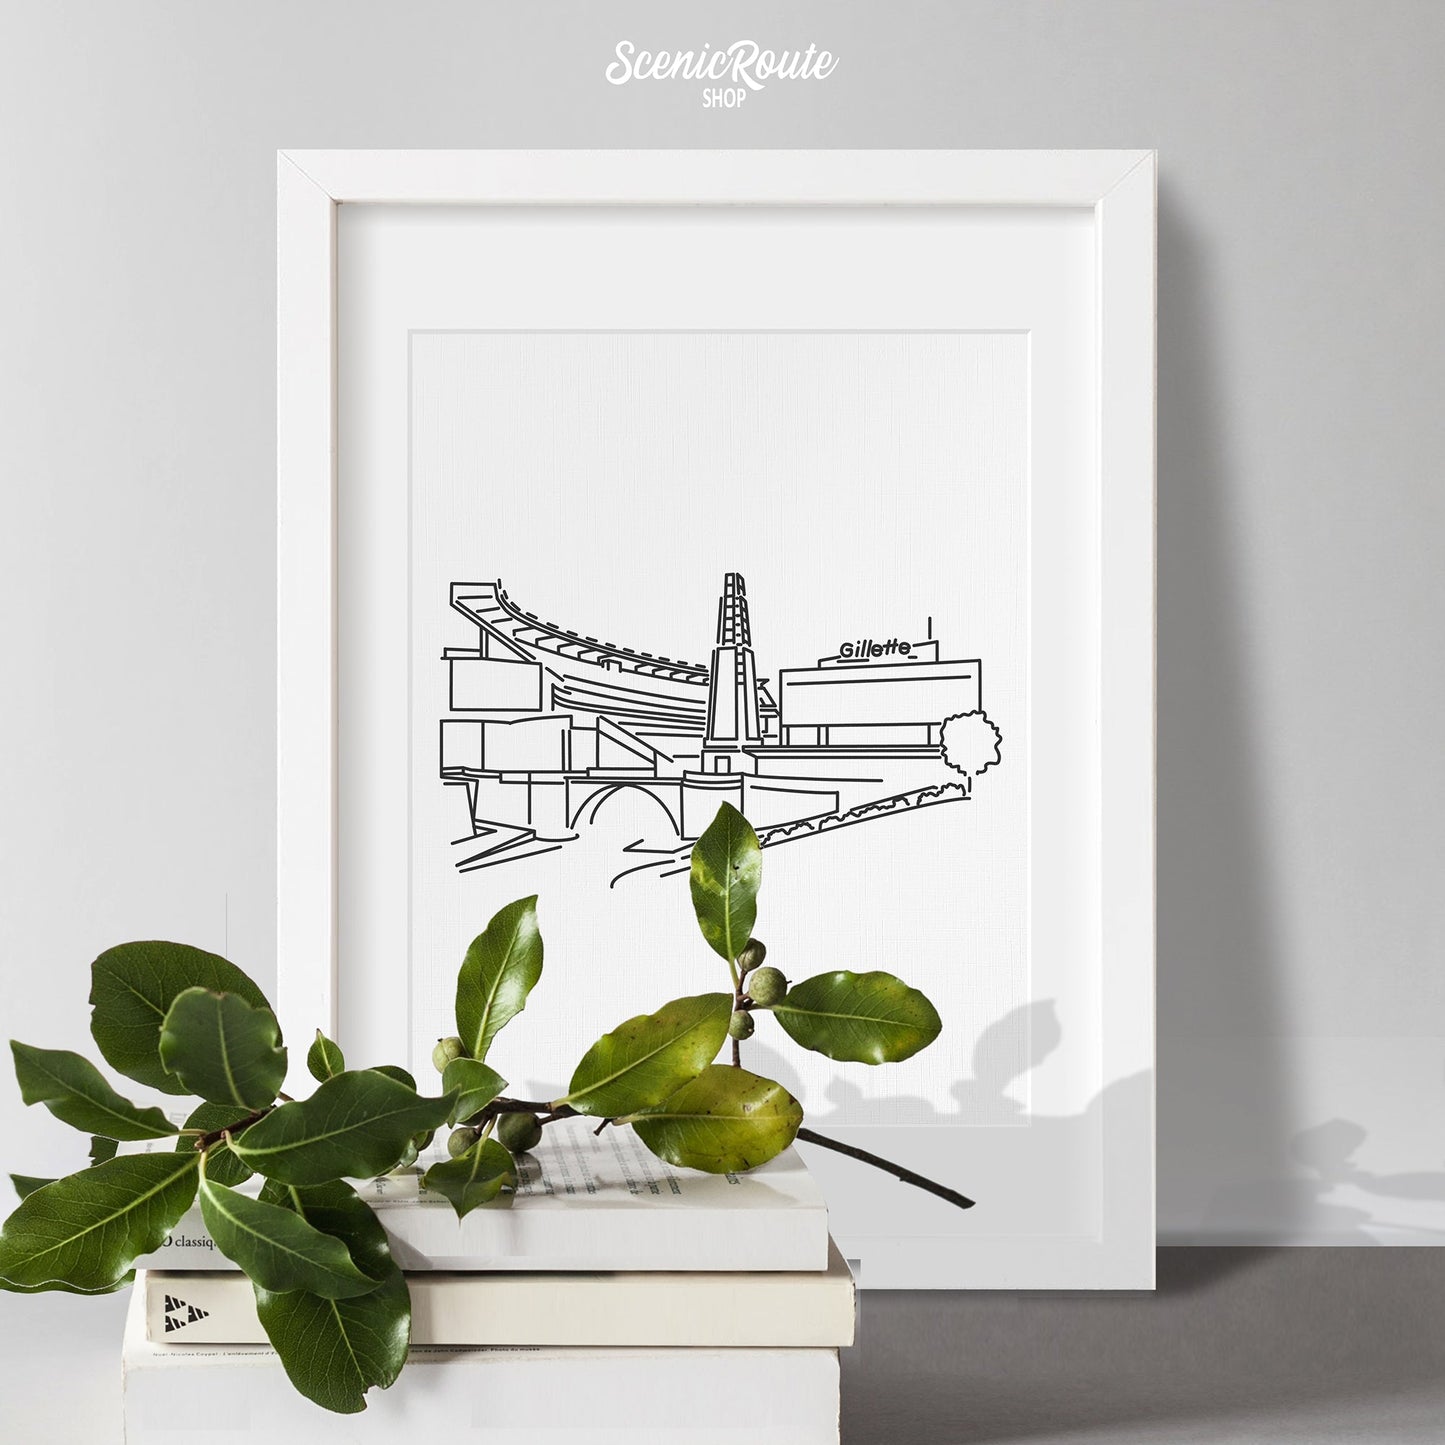 A framed line art drawing of the Patriots Stadium with books and a holly sprig